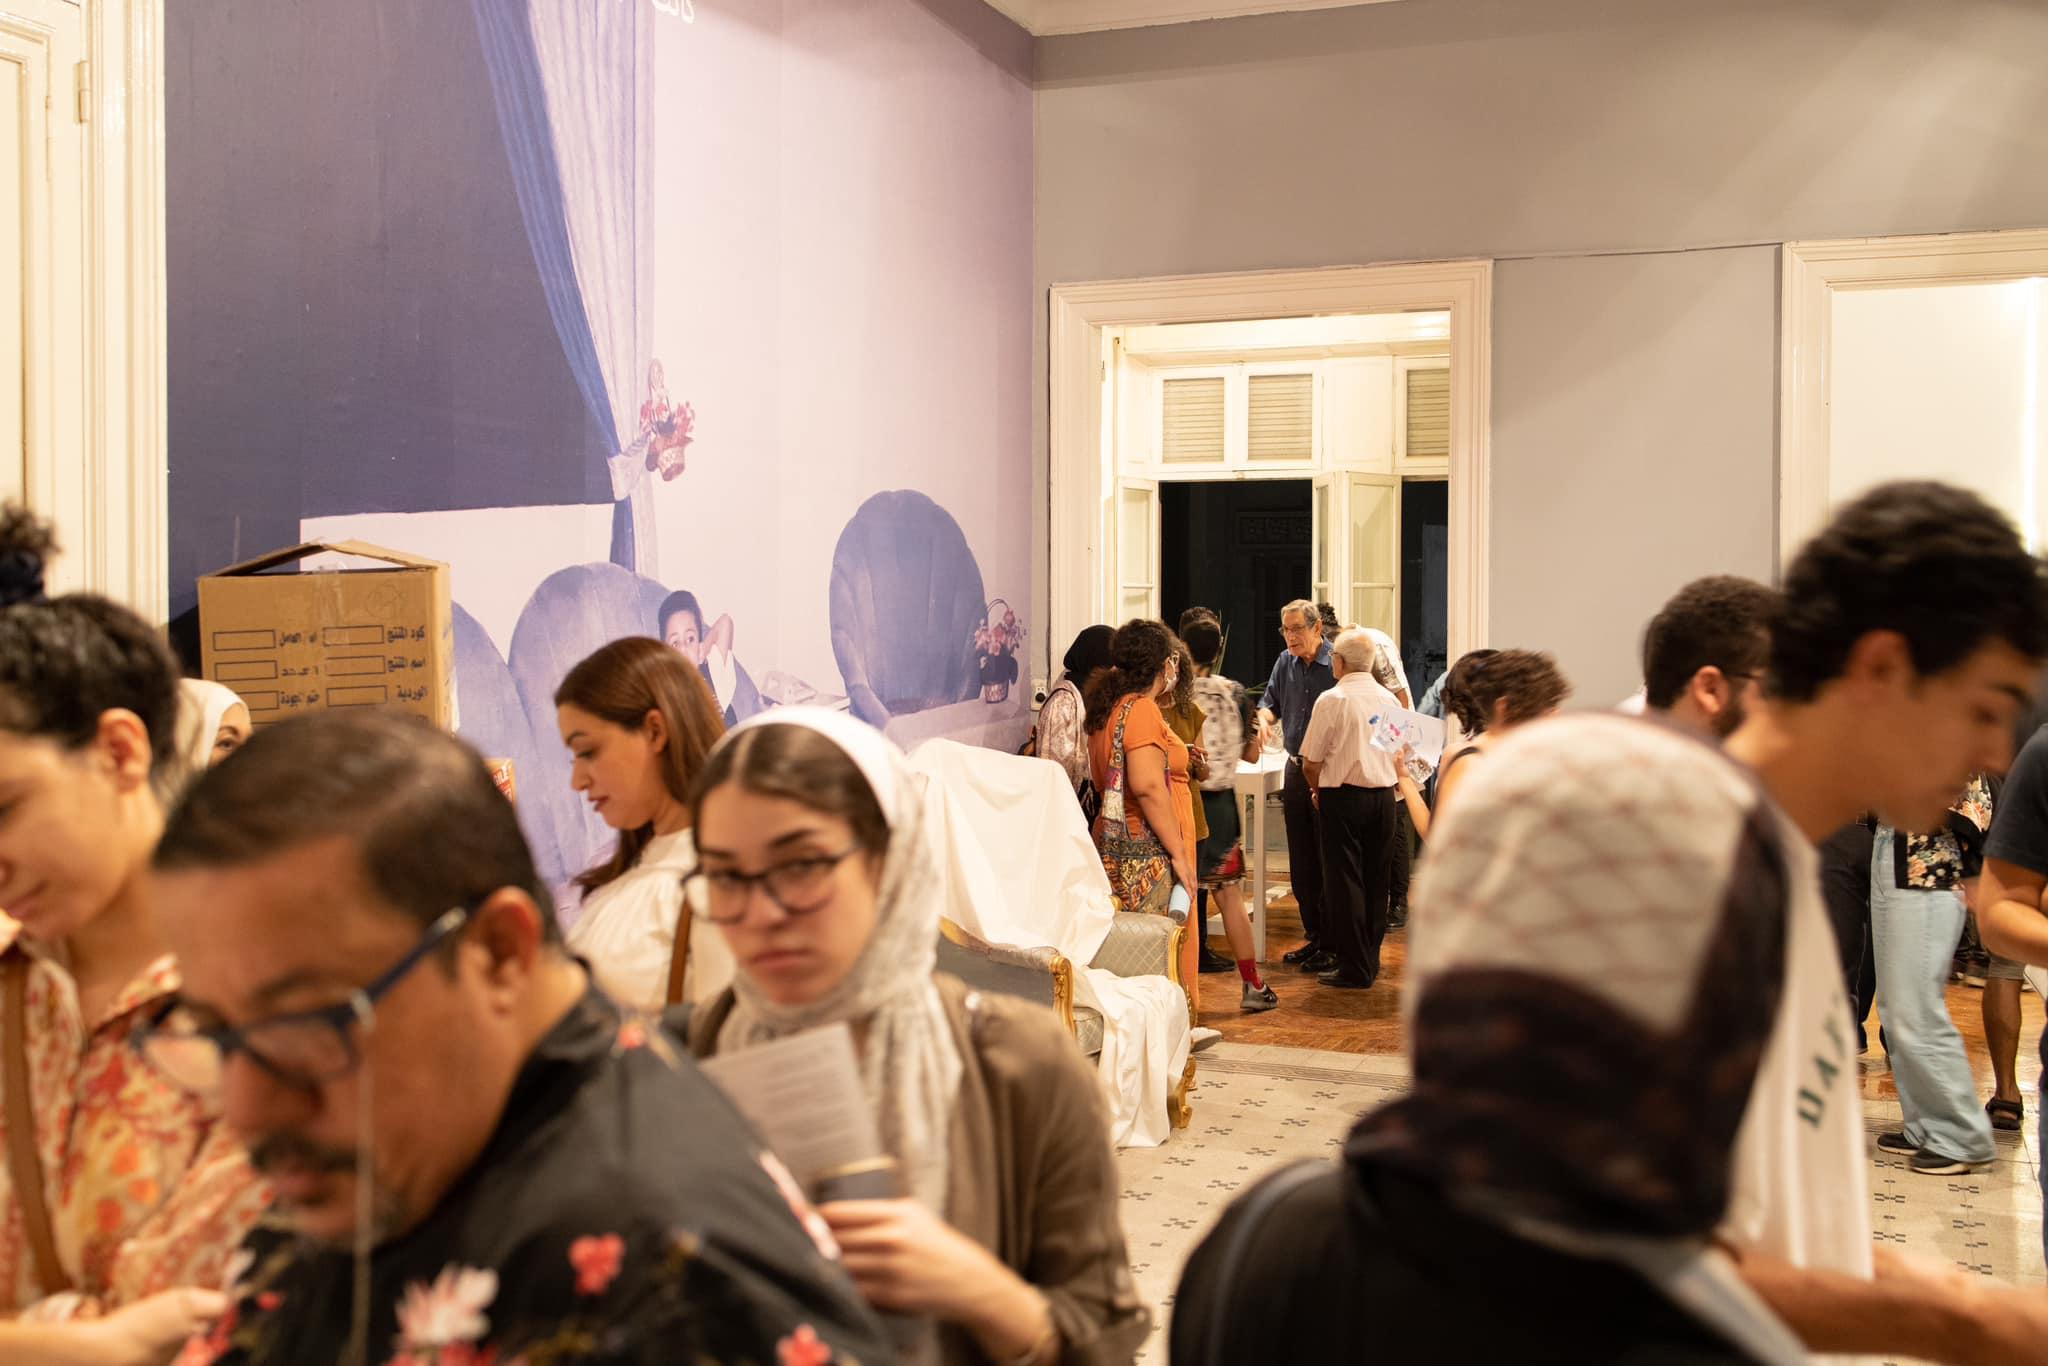 Figure 1: Visitors in Cairo’s Contemporary Image Collective gallery on the opening night, October 2, 2022